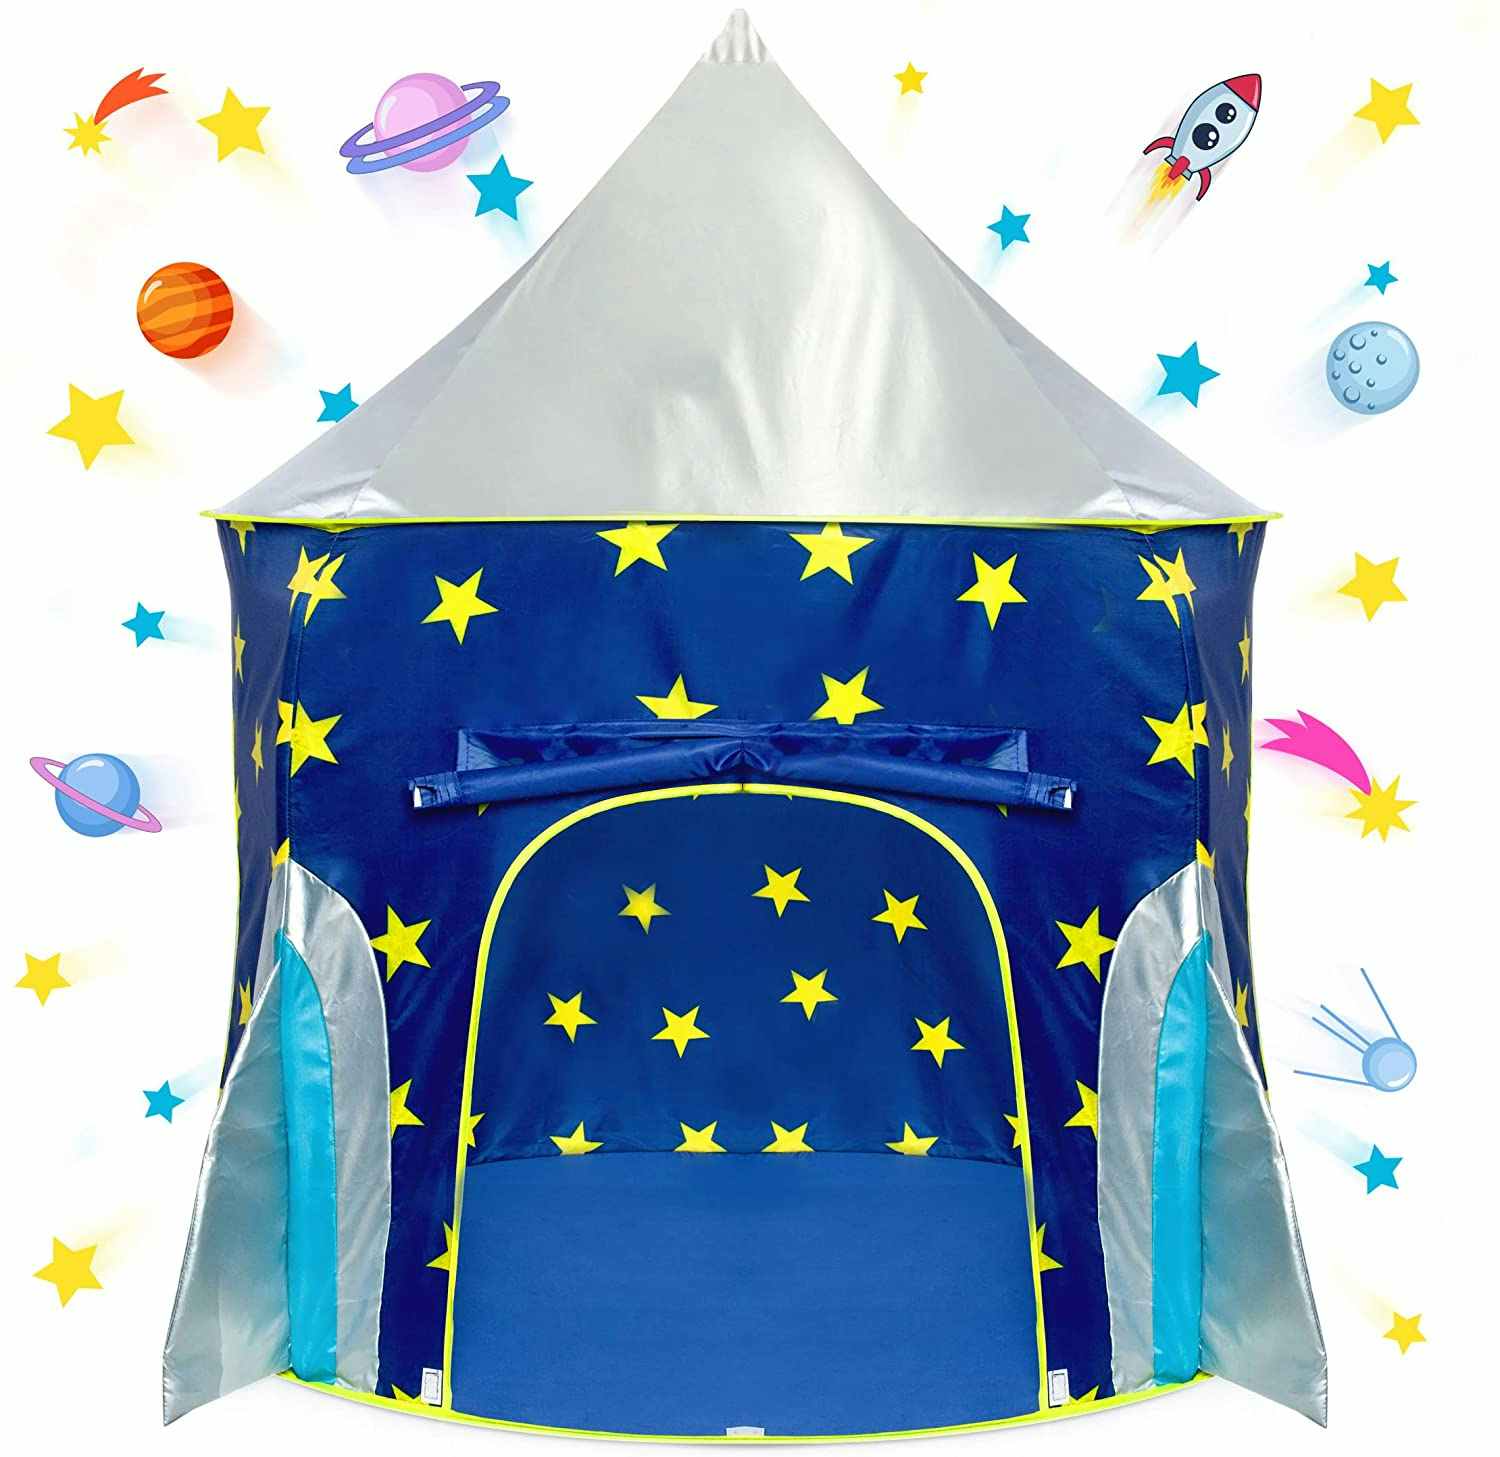 A spaceship-themed USA Toyz Pop Up Kids Tent on a white background.